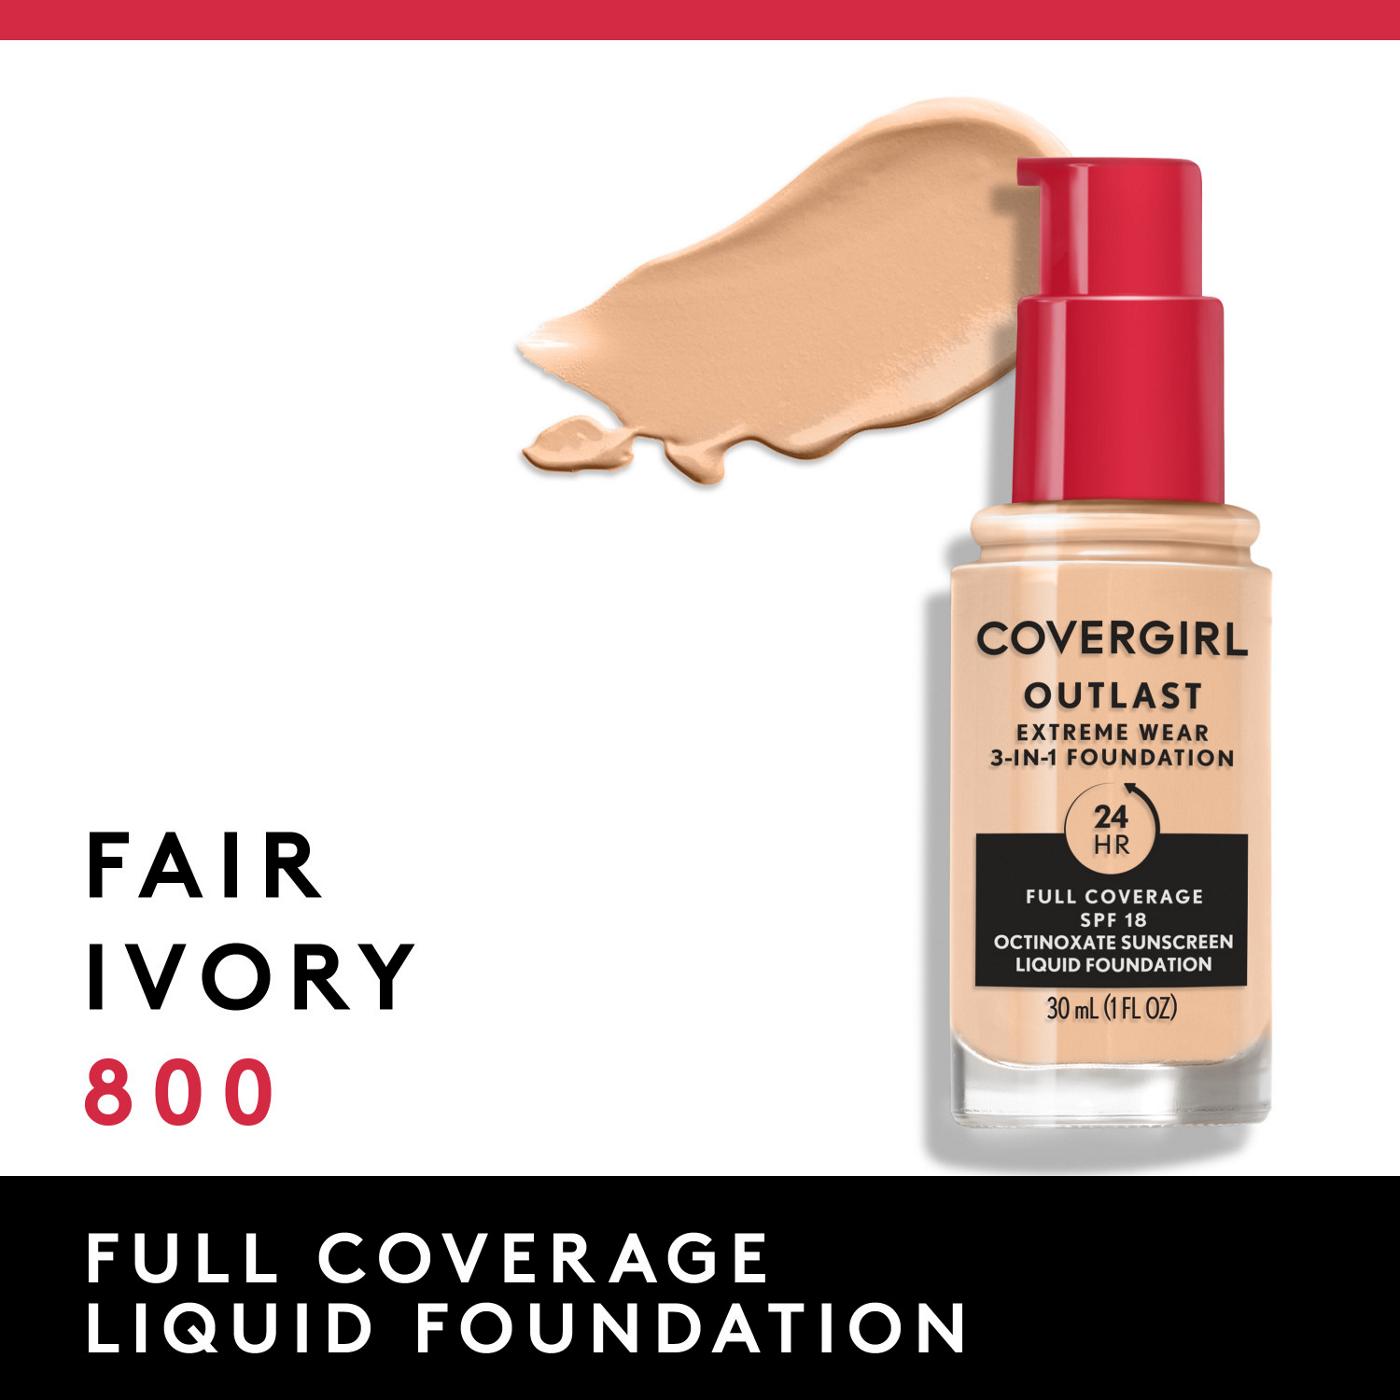 Covergirl Outlast Extreme Wear Liquid Foundation 800 Fair Ivory; image 8 of 11